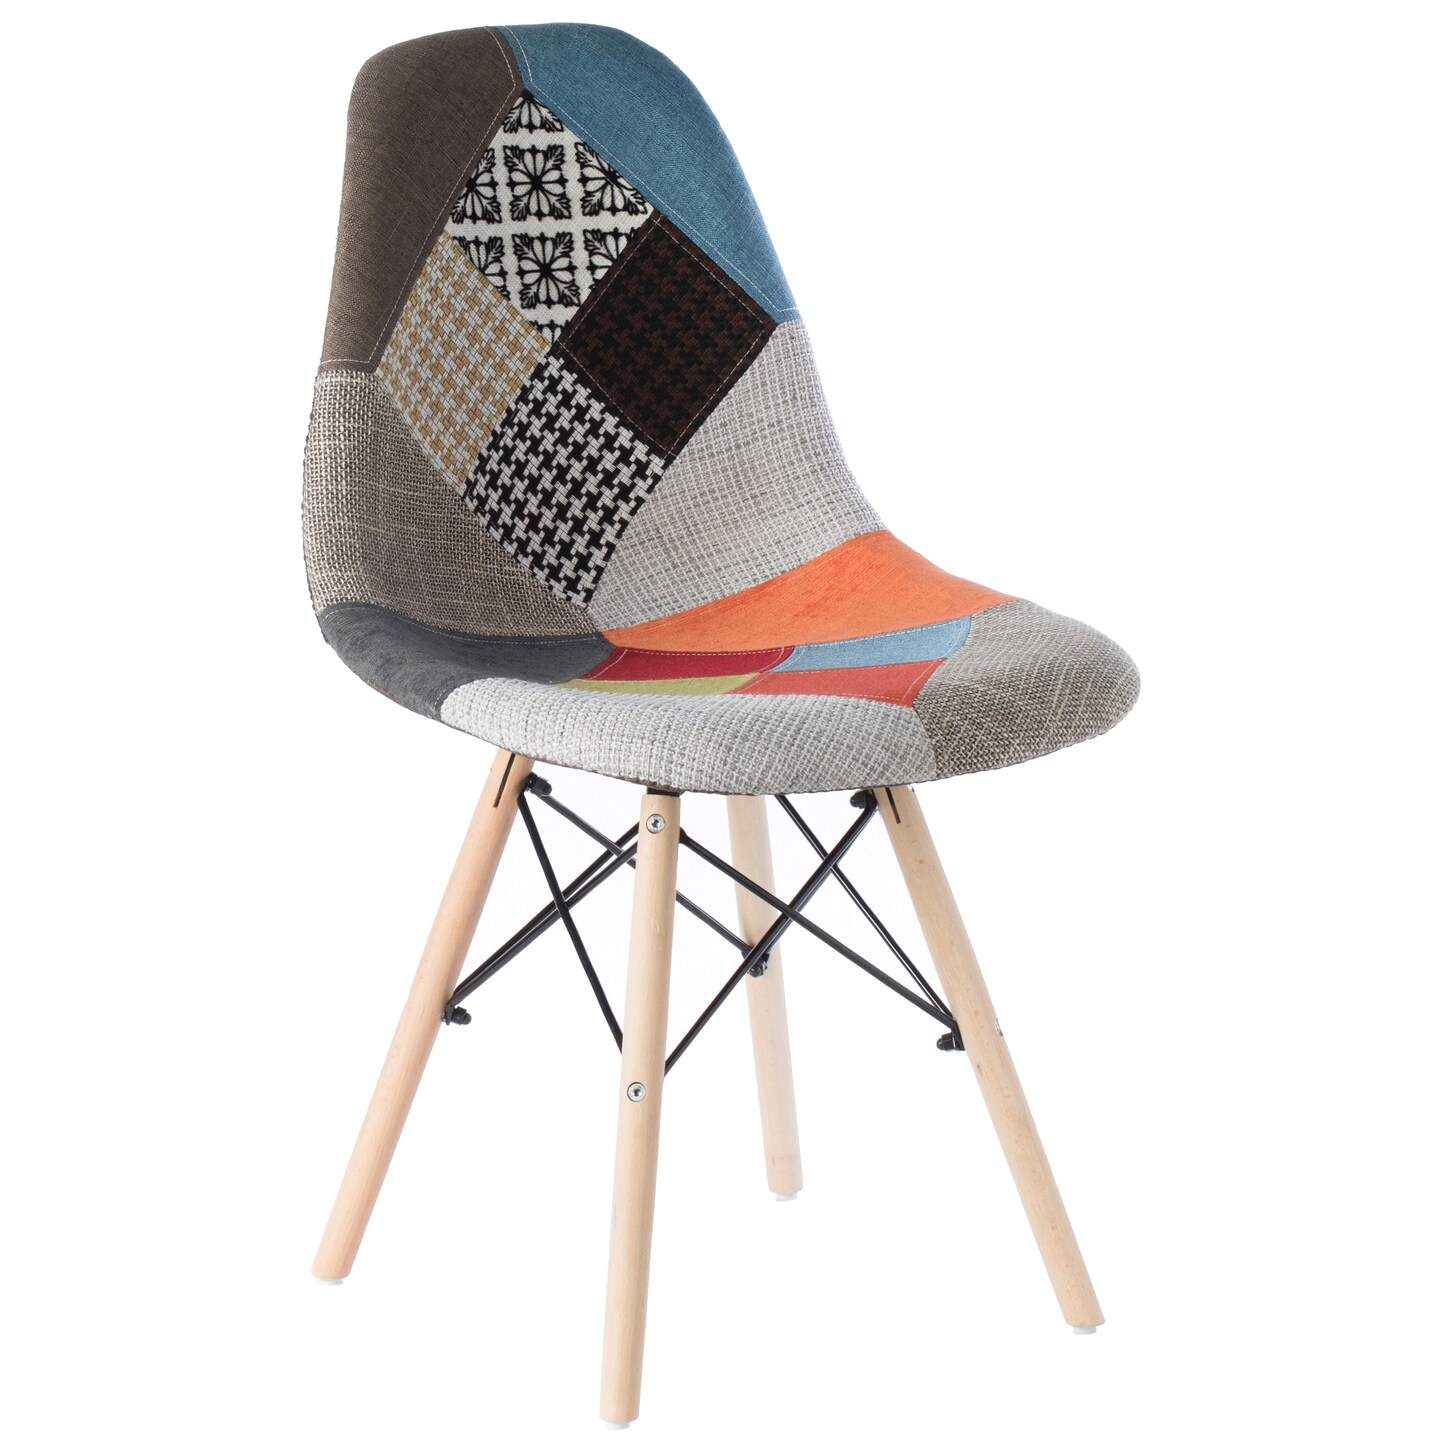 Fabulaxe Mid-Century Modern Upholstered Plastic Multicolor Fabric Patchwork DSW Shell Dining Chair with Wooden Dowel Eiffel Legs